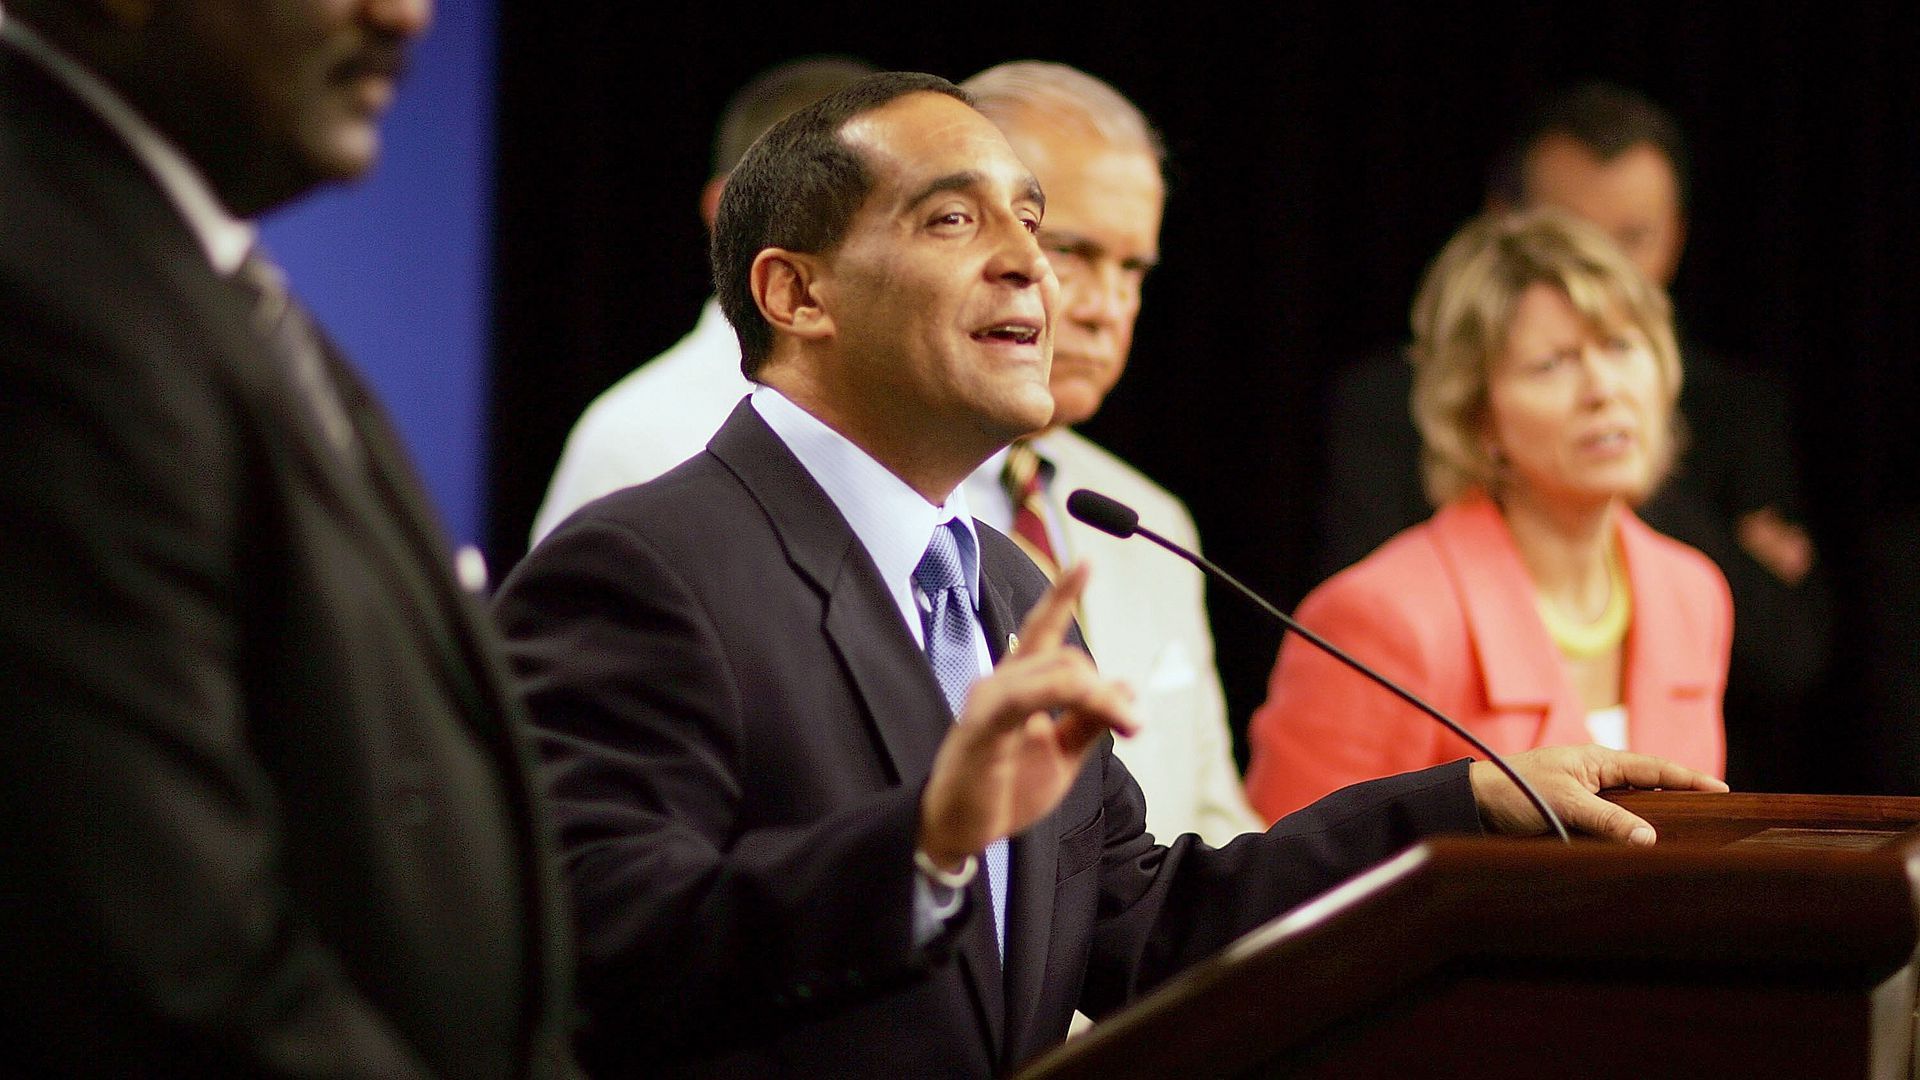 Joe Martinez surrounded by other Miami-Dade commissioners and county officials at a press conference on July 28, 2006.